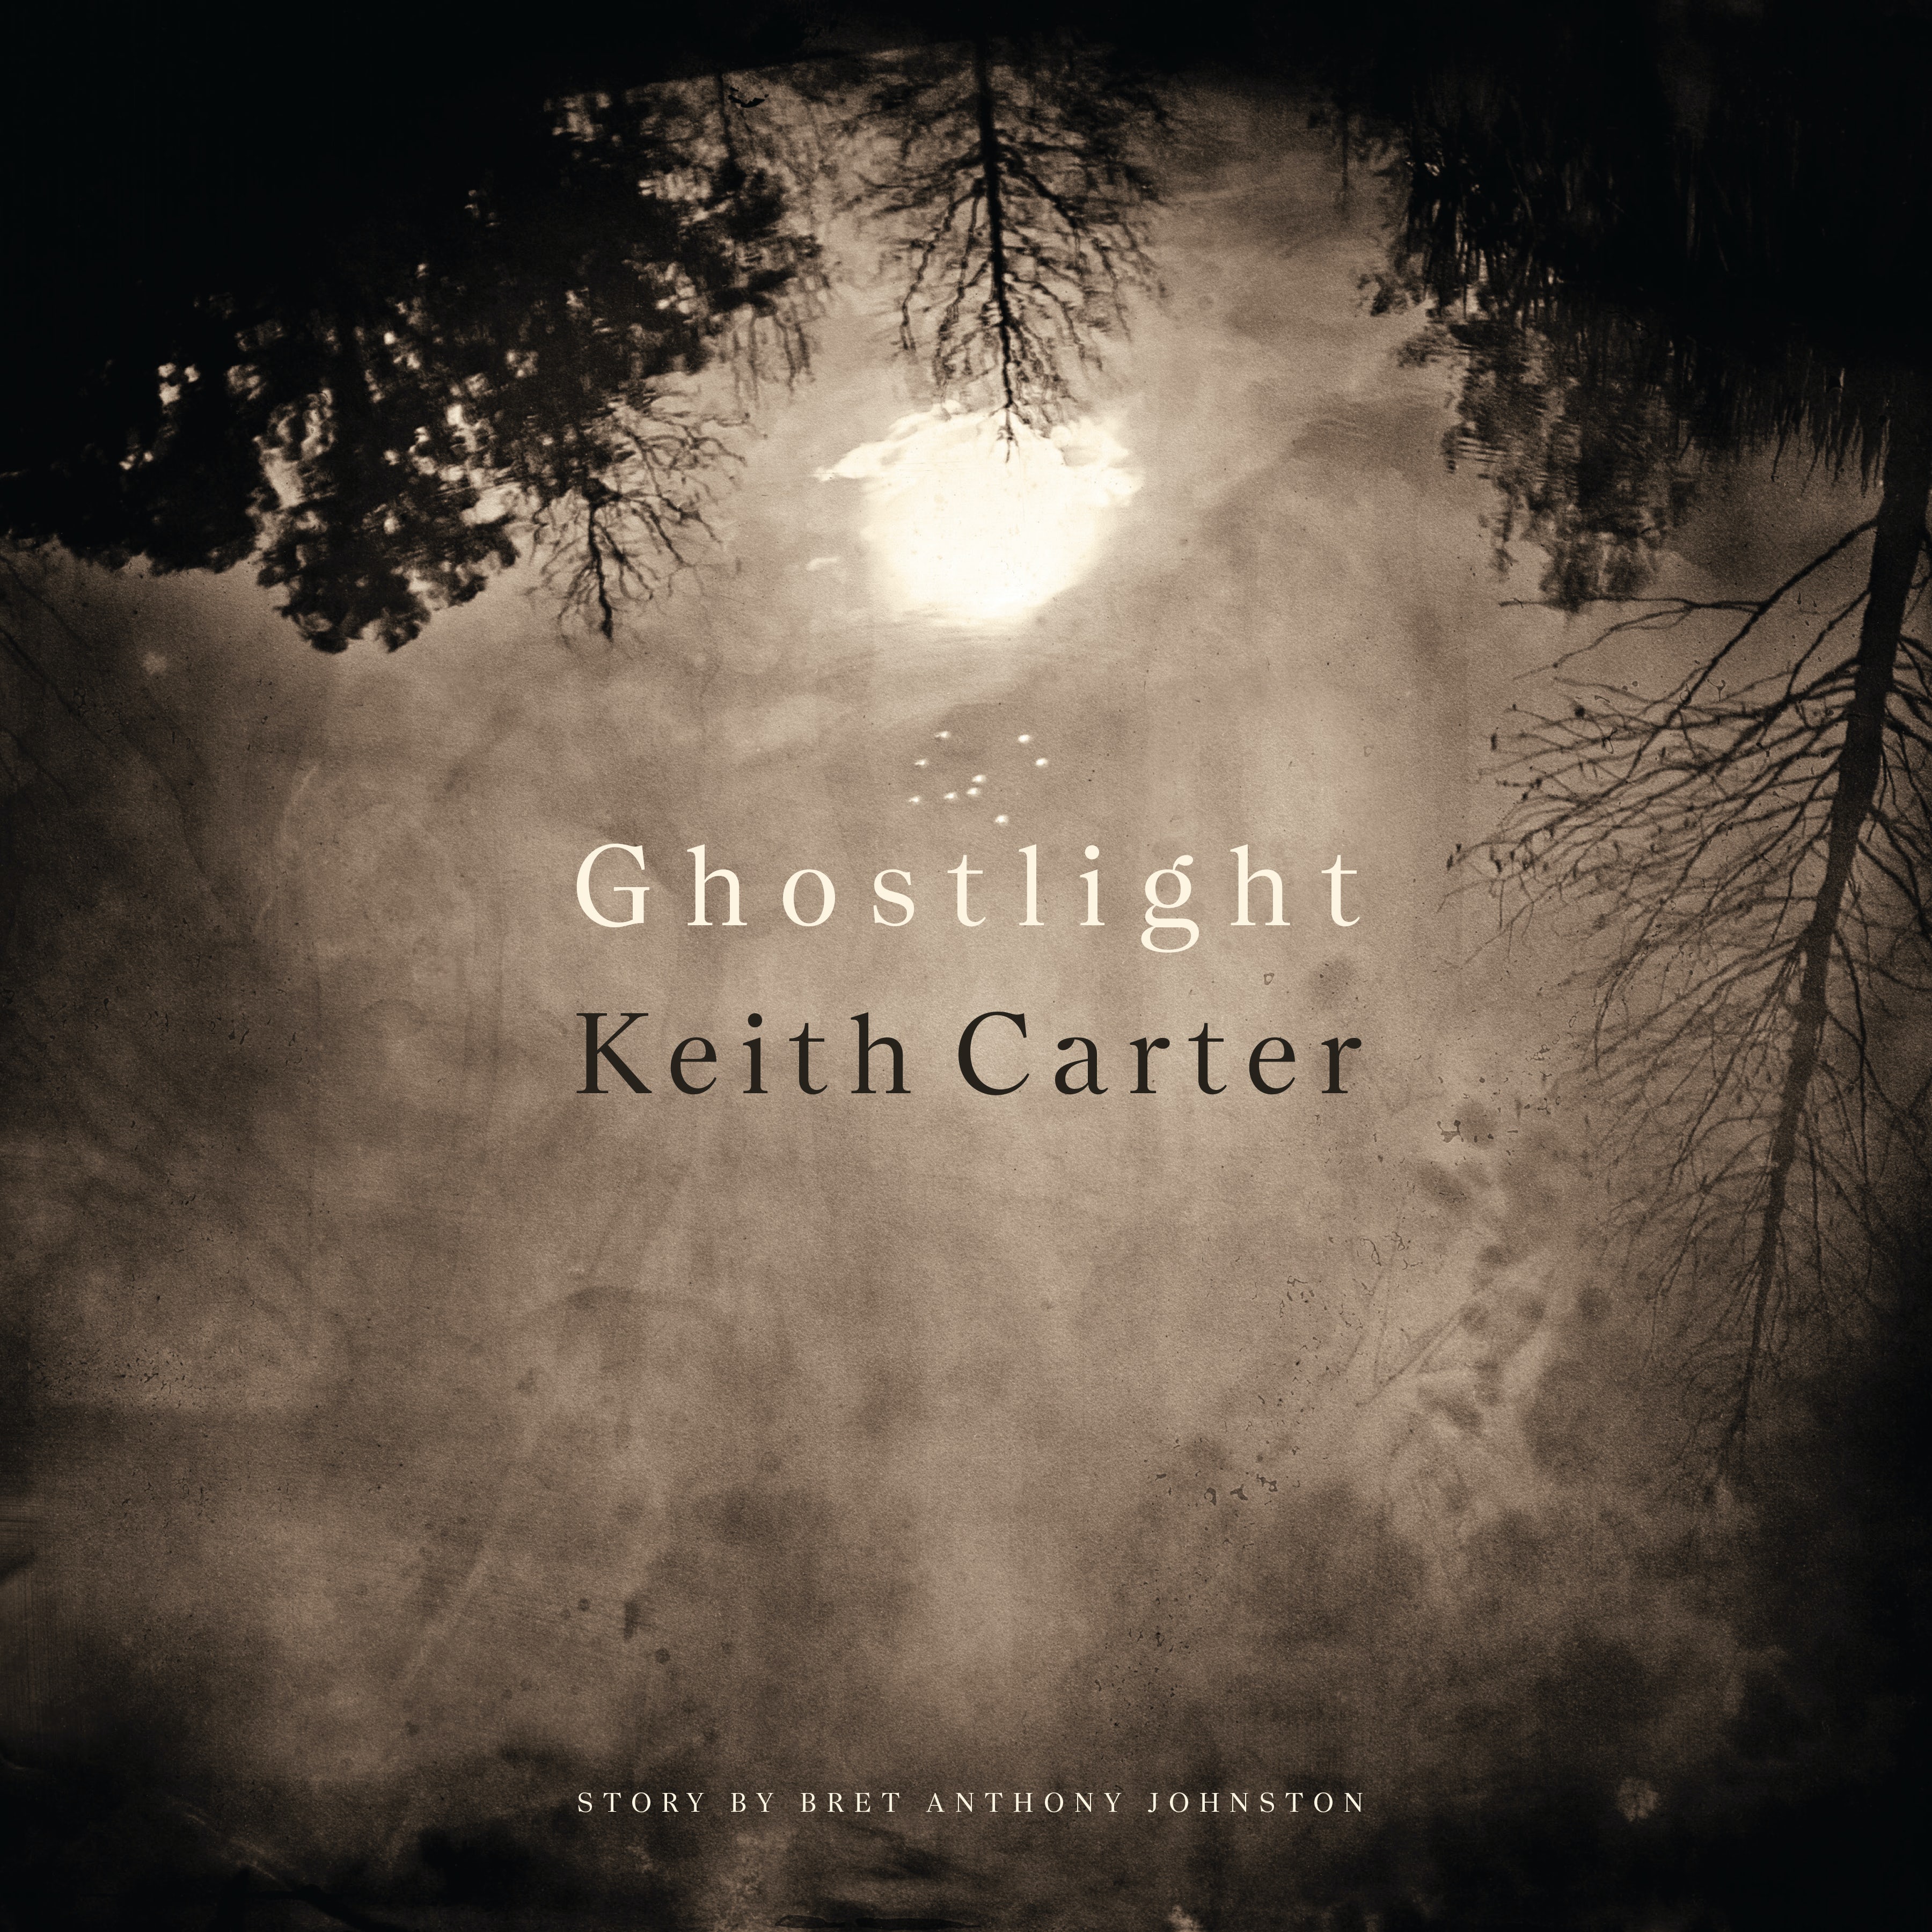 Ghost Light Keith Carter at Catherine Couturier Gallery